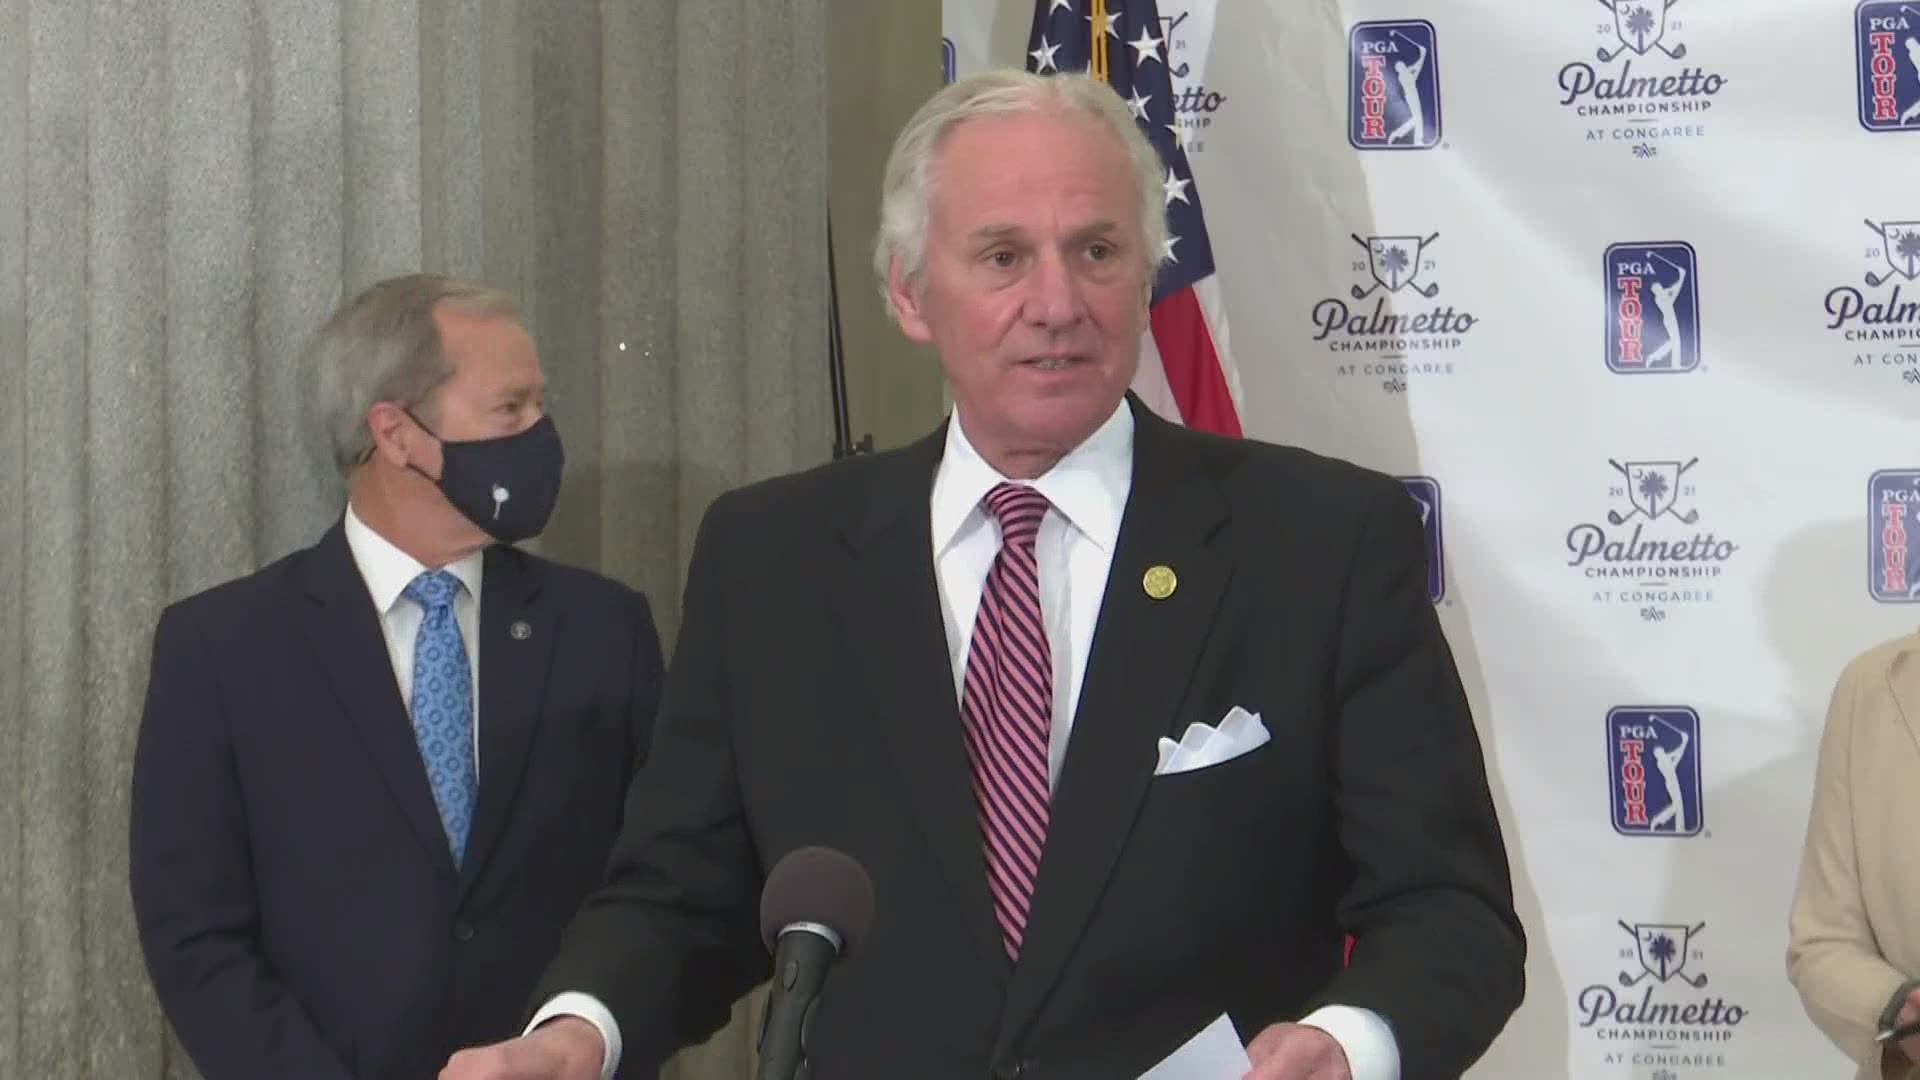 South Carolina Gov. Henry McMaster announced a third PGA event will come to the Palmetto State in 2021.